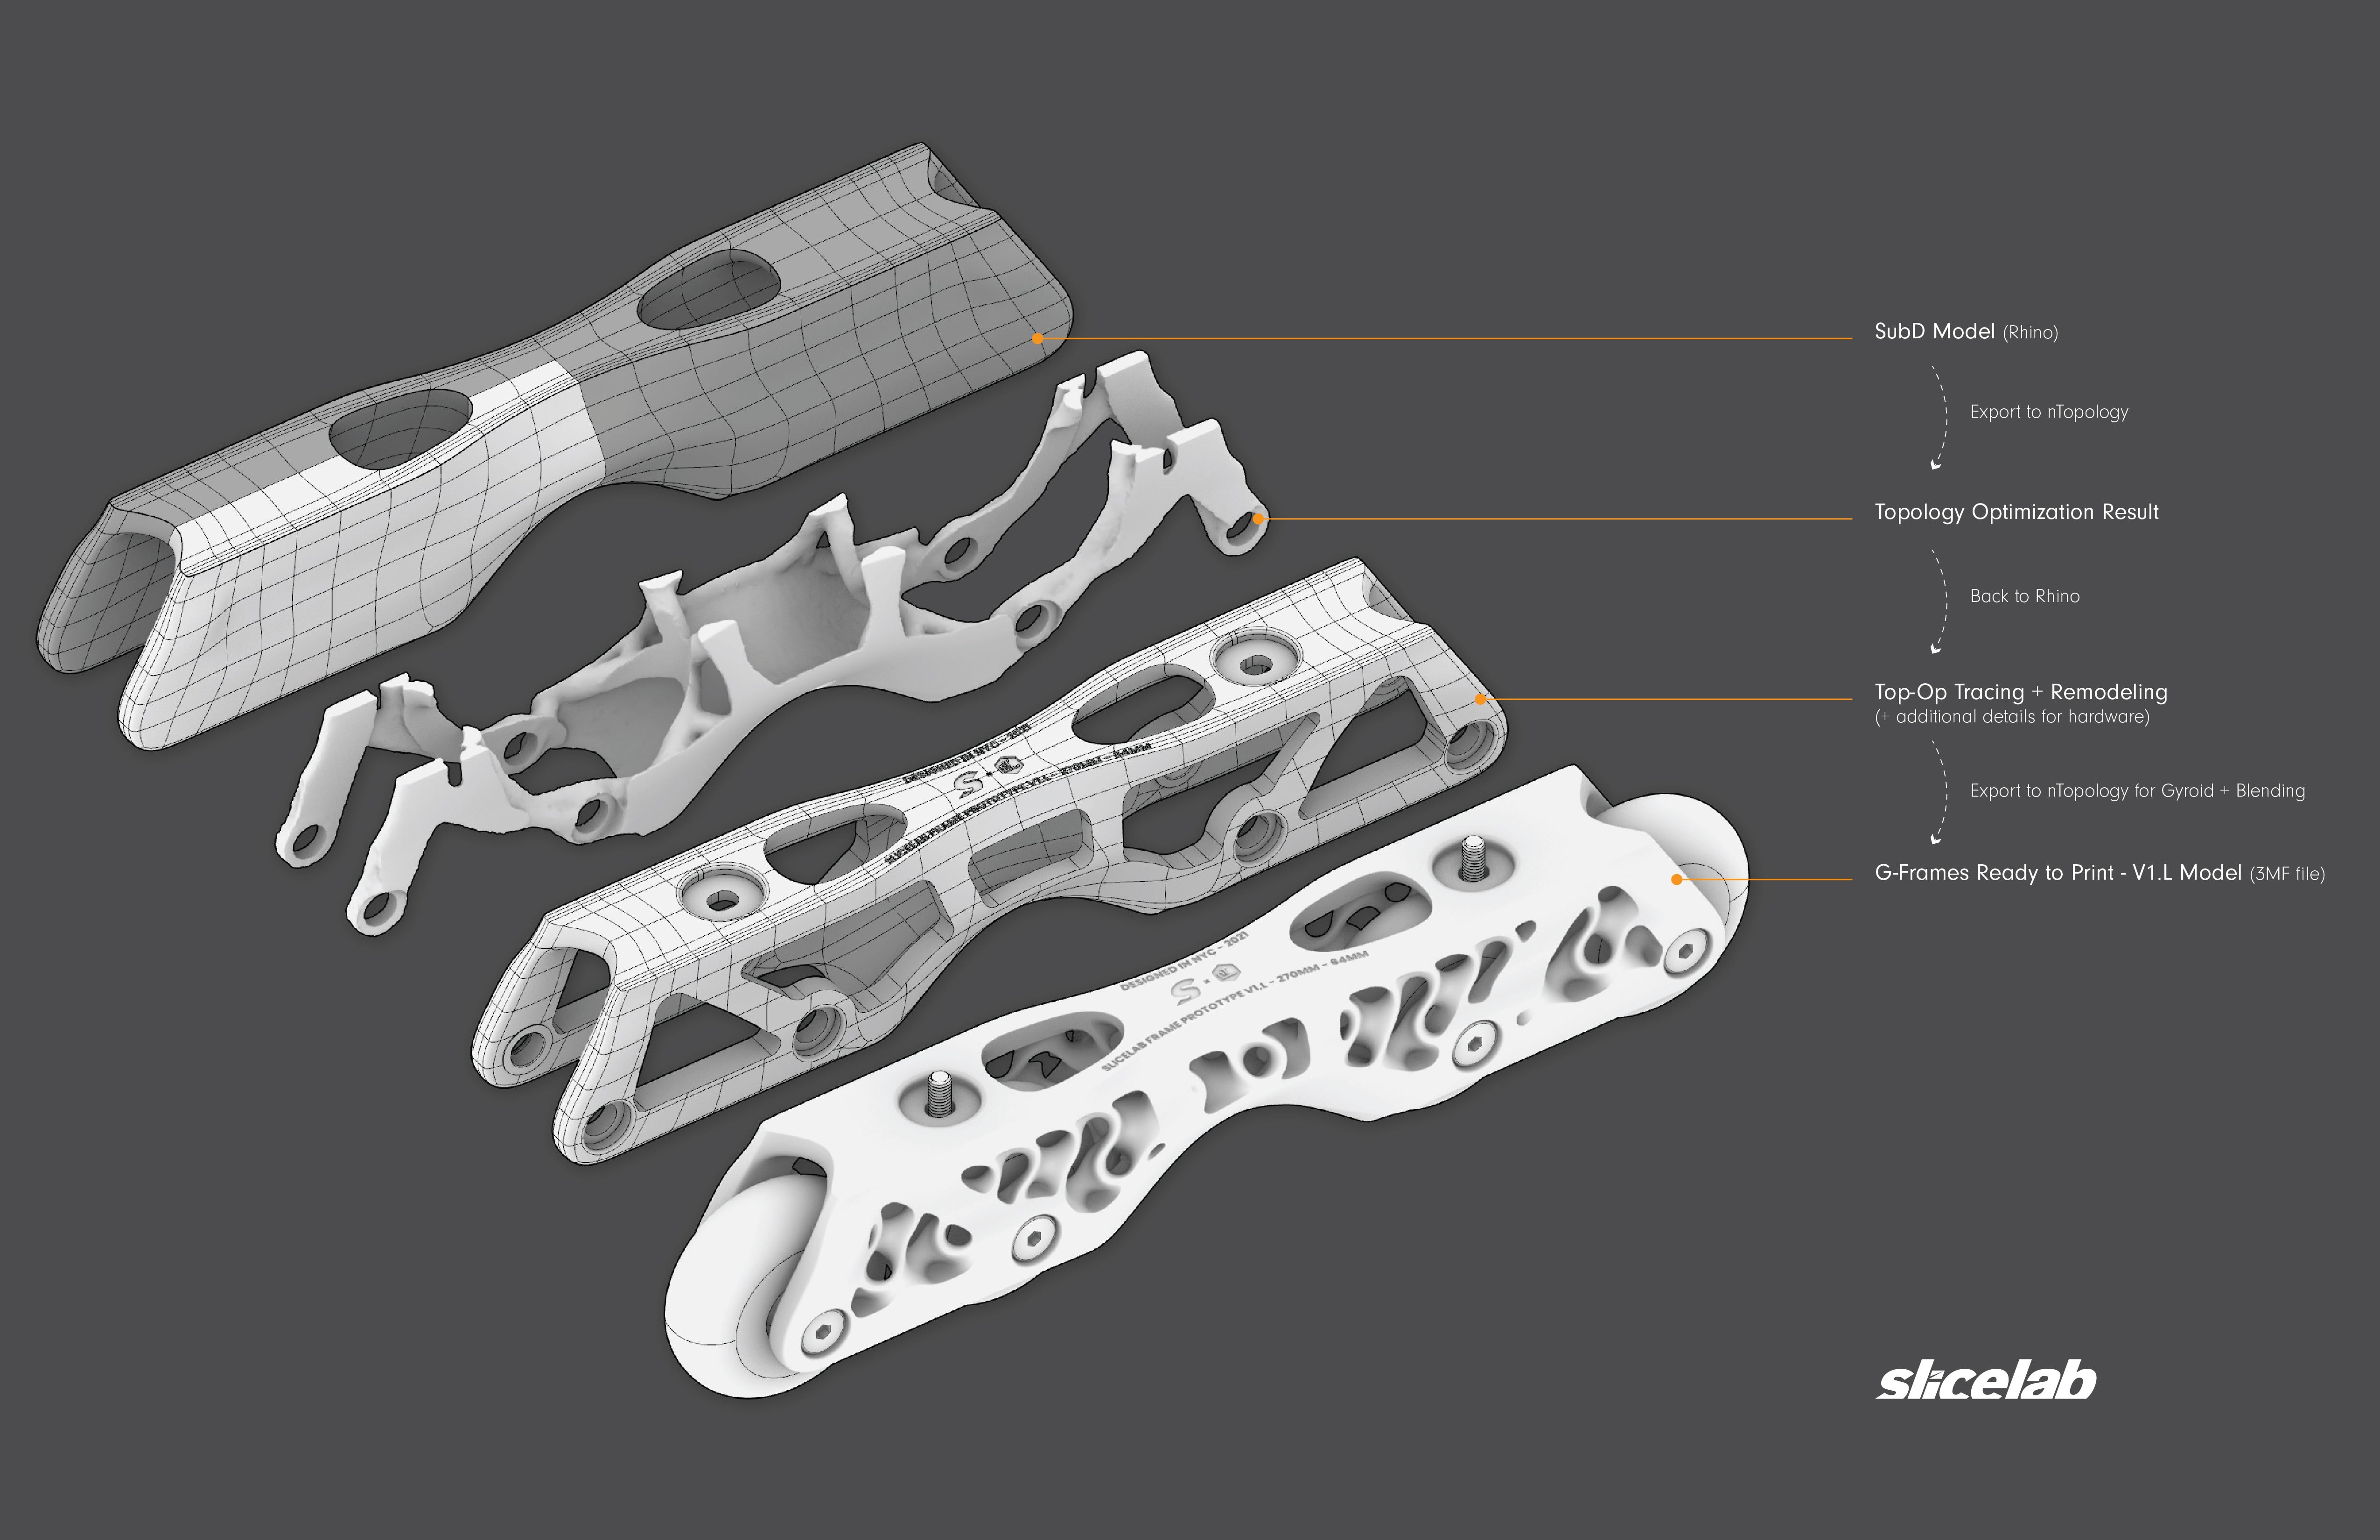 Topology Optimization for Skateboard Trucks and the Future of Design